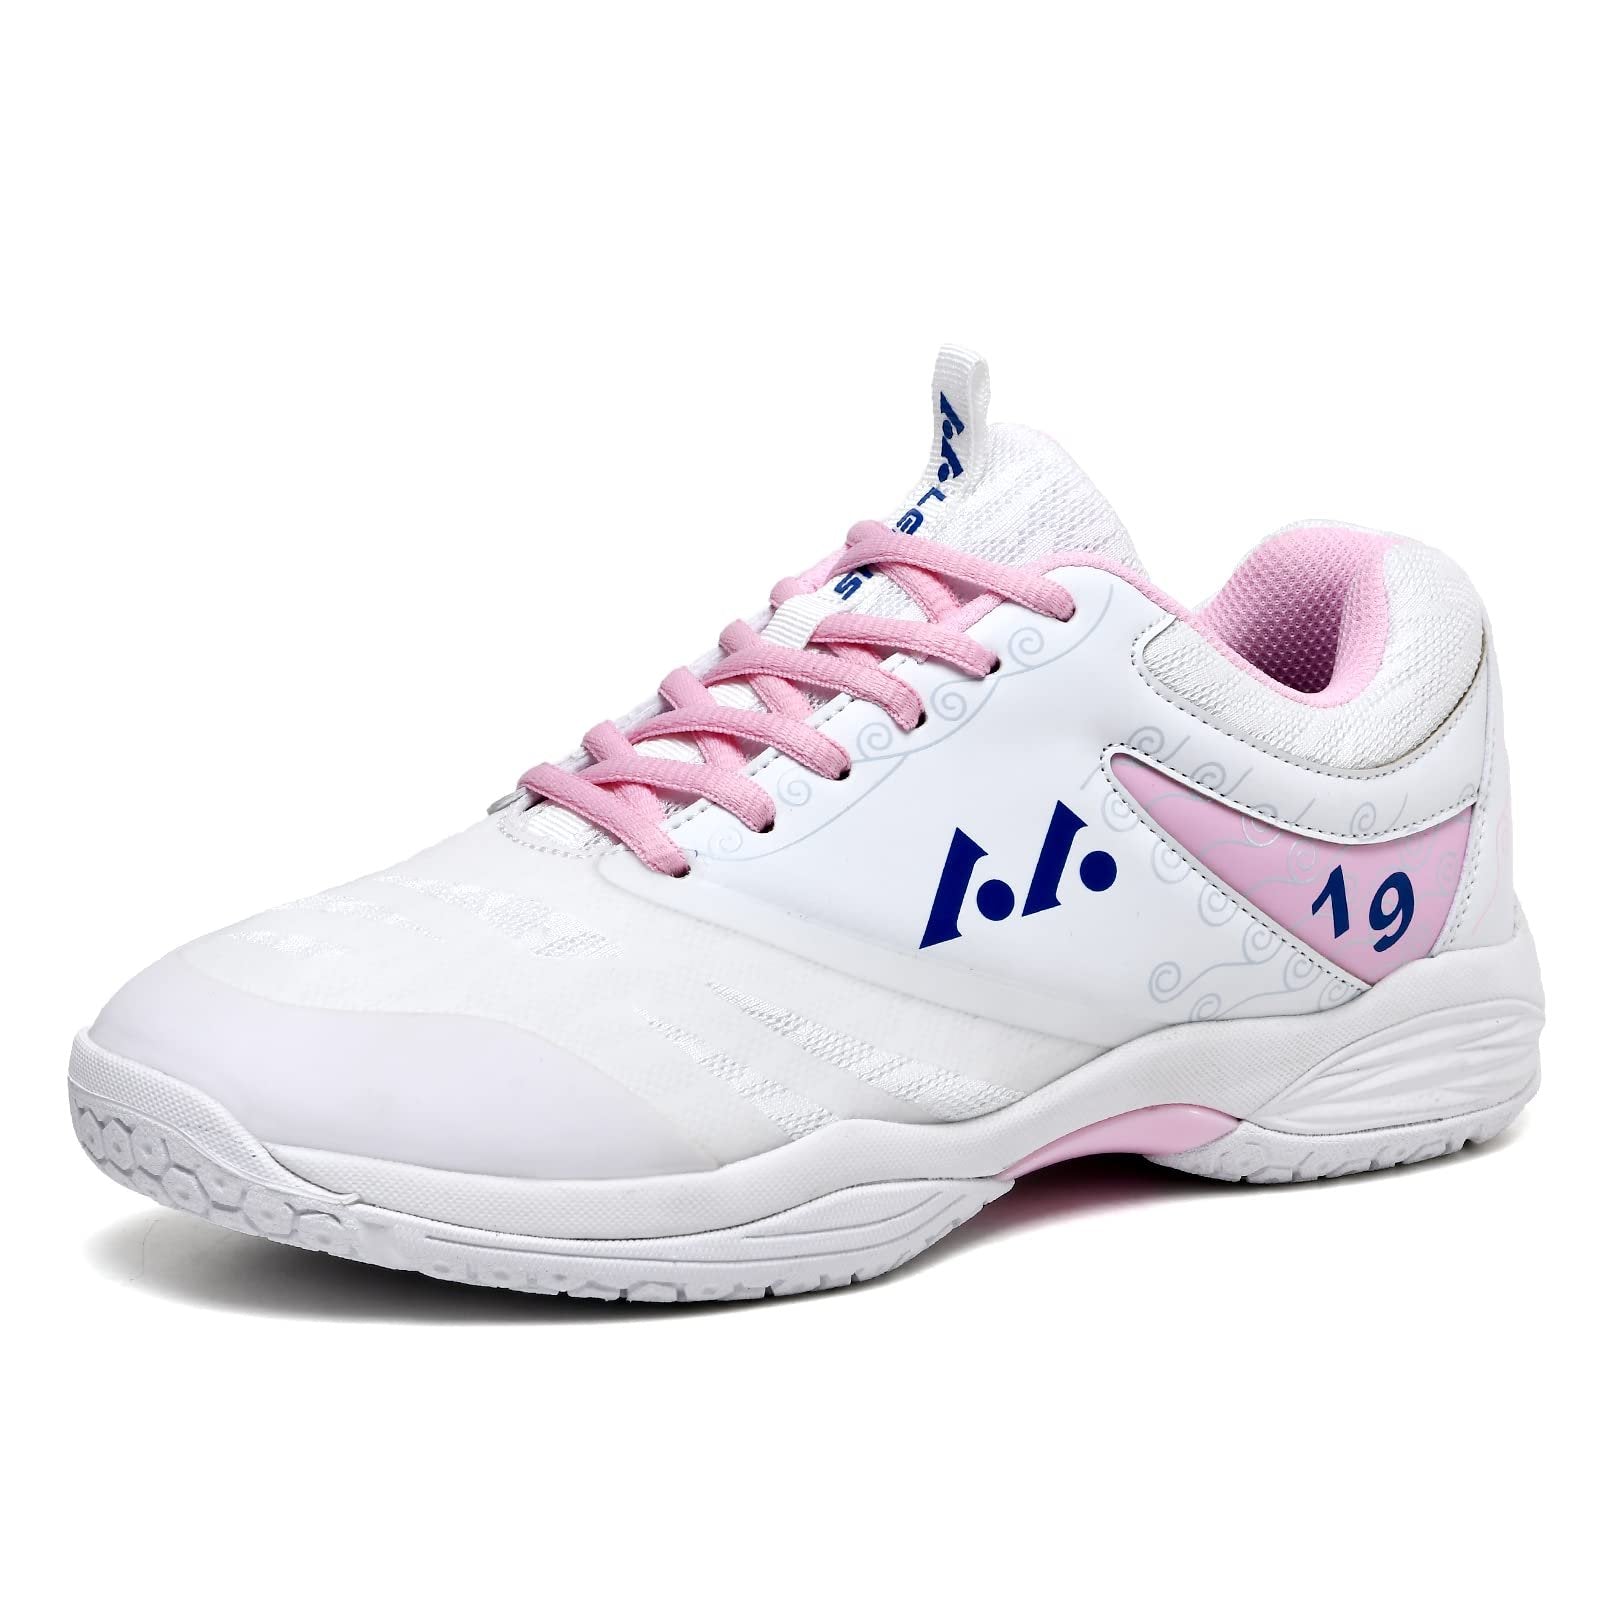 Womens Mens Lightweight Indoor Court Shoes Badminton Shoes for Pickleball, Tennis, Table Tennis, Volleyball (019 White, 39)